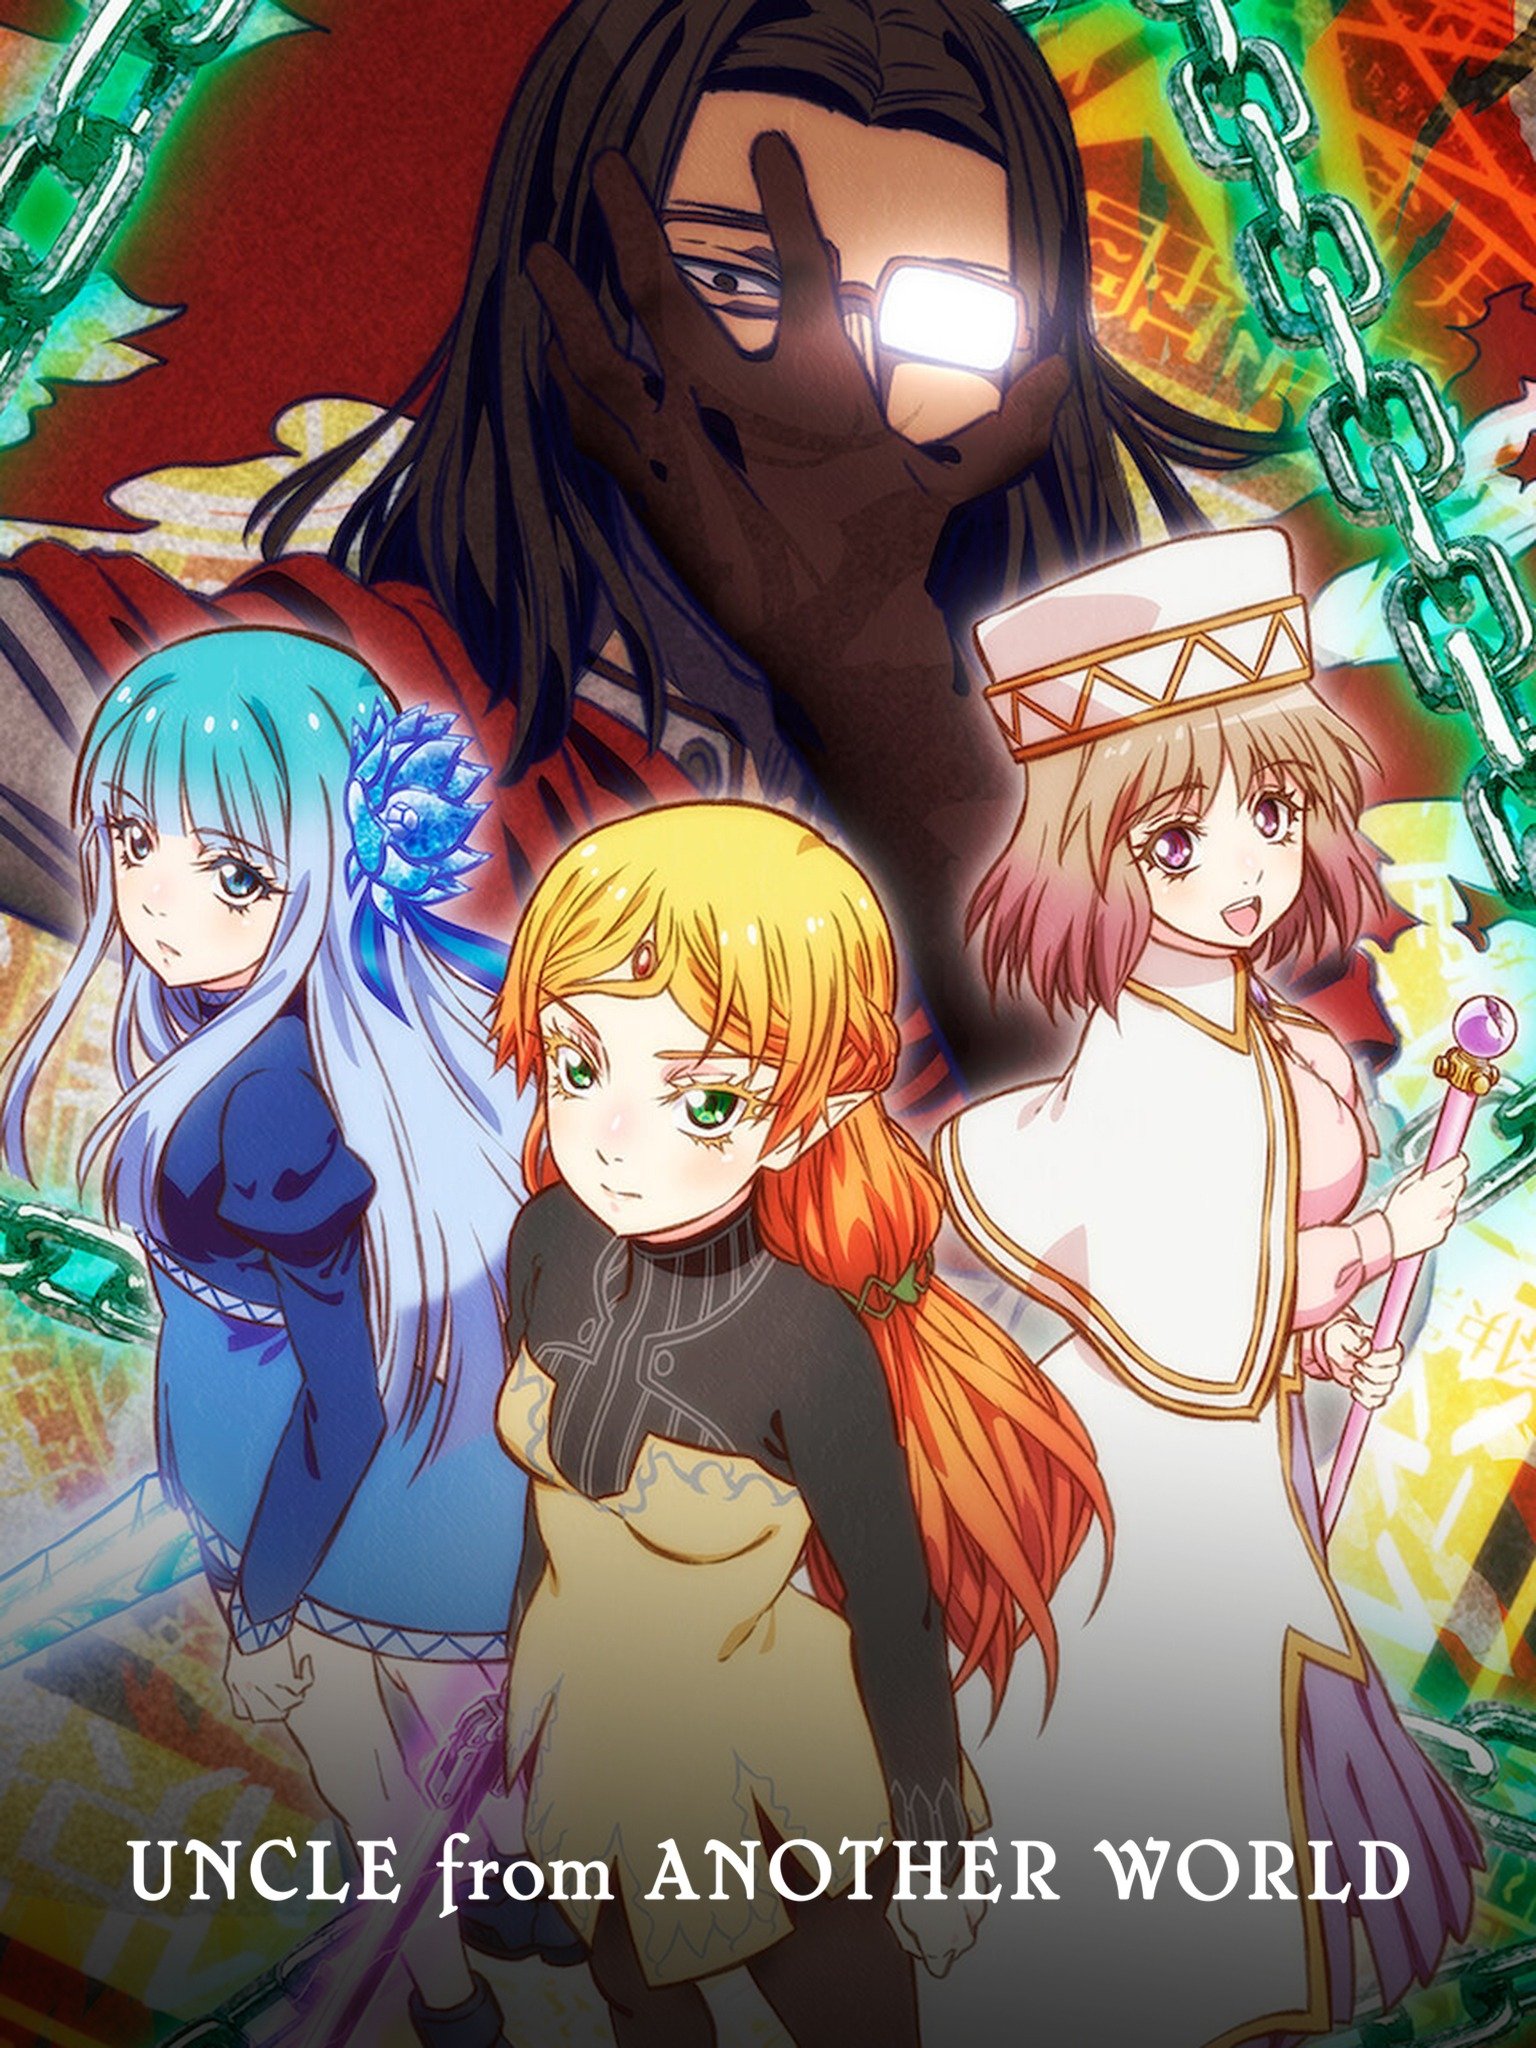 Lost Ones from Another World | Isekai Cheat Magician Wiki | Fandom